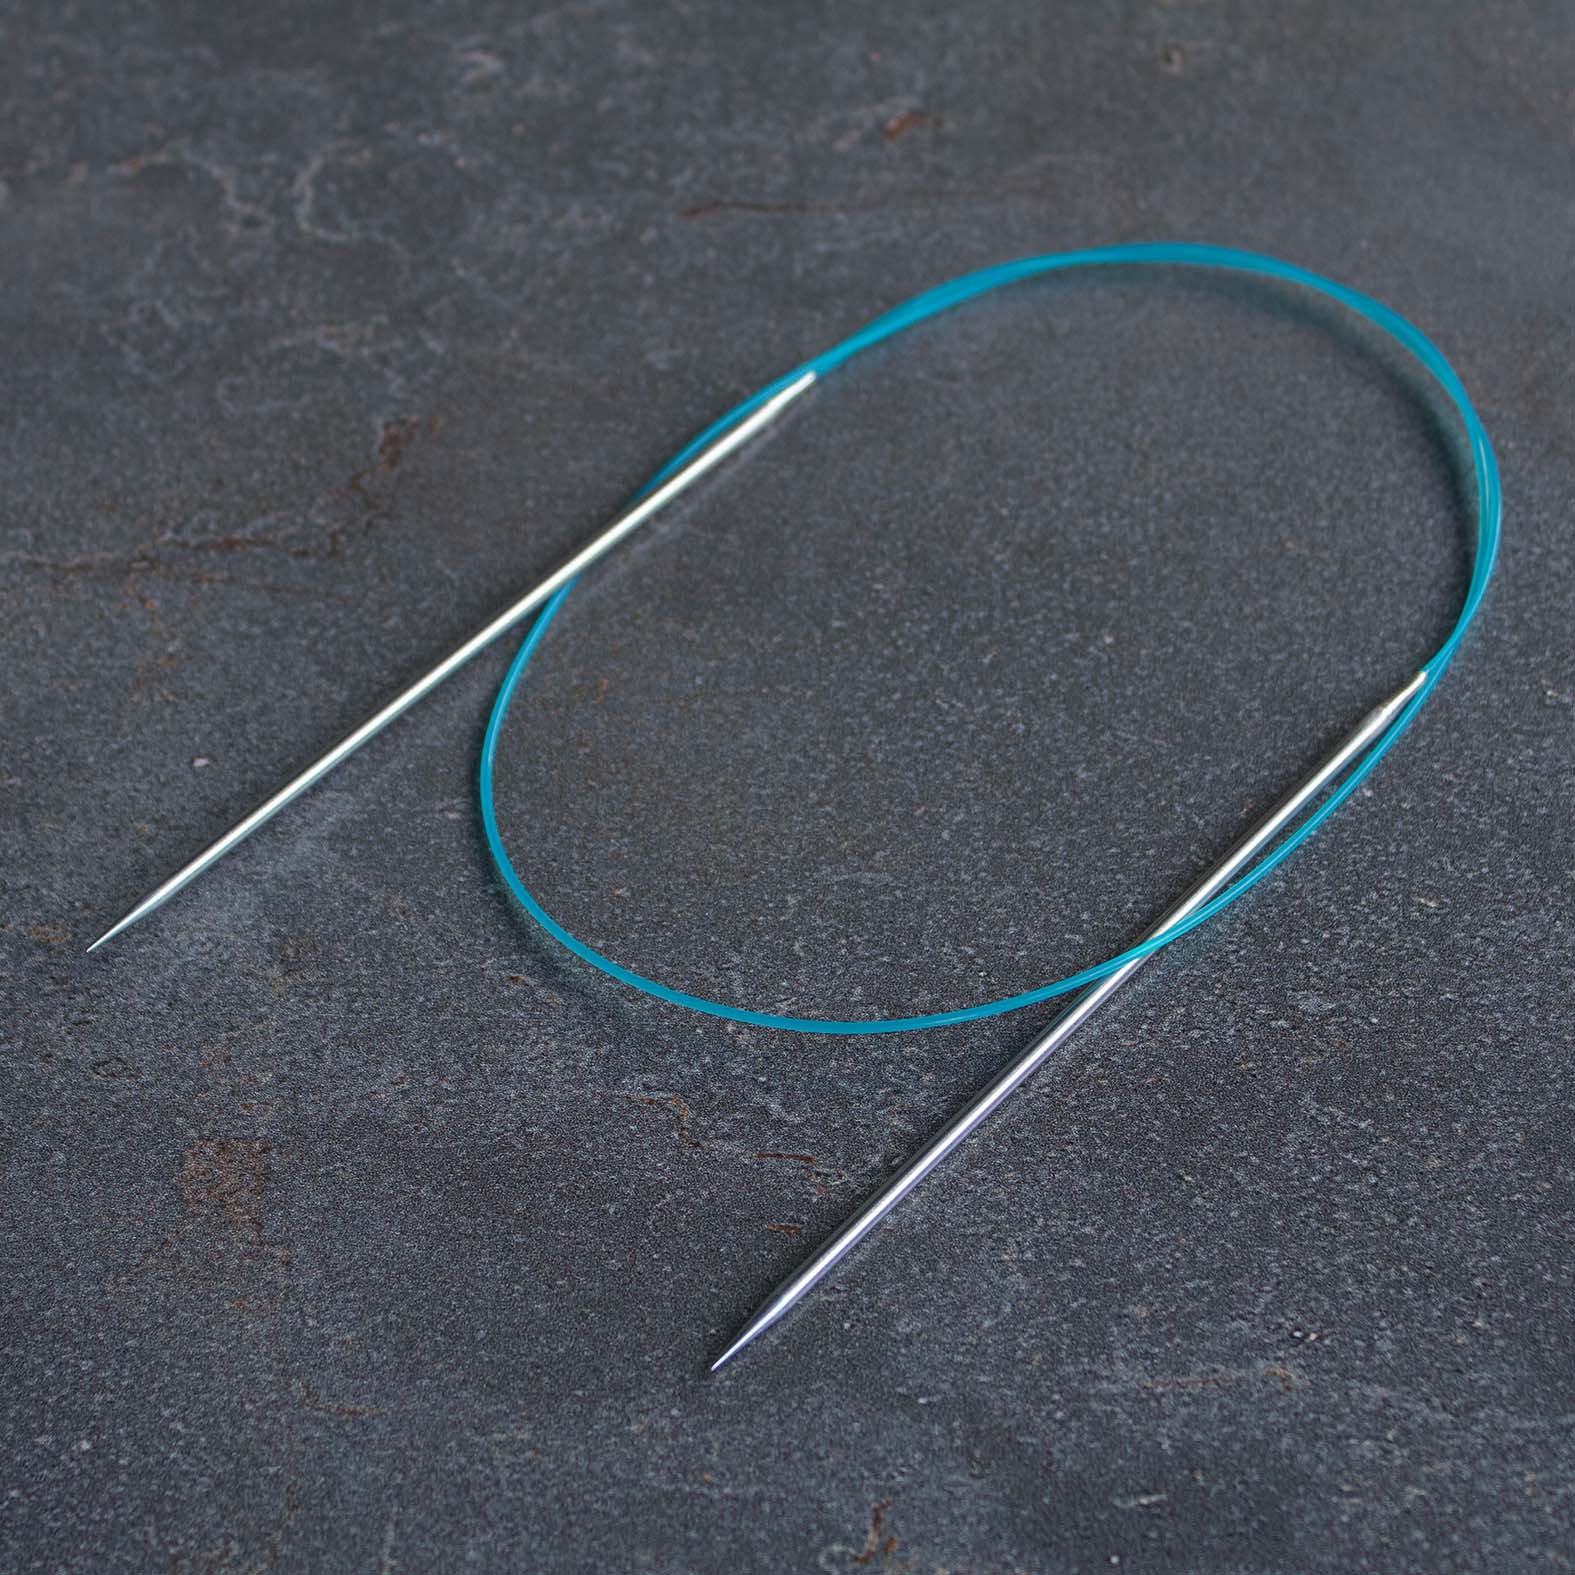 US 8 (5mm) Knitting Needles  Hooks & Needles For All Projects